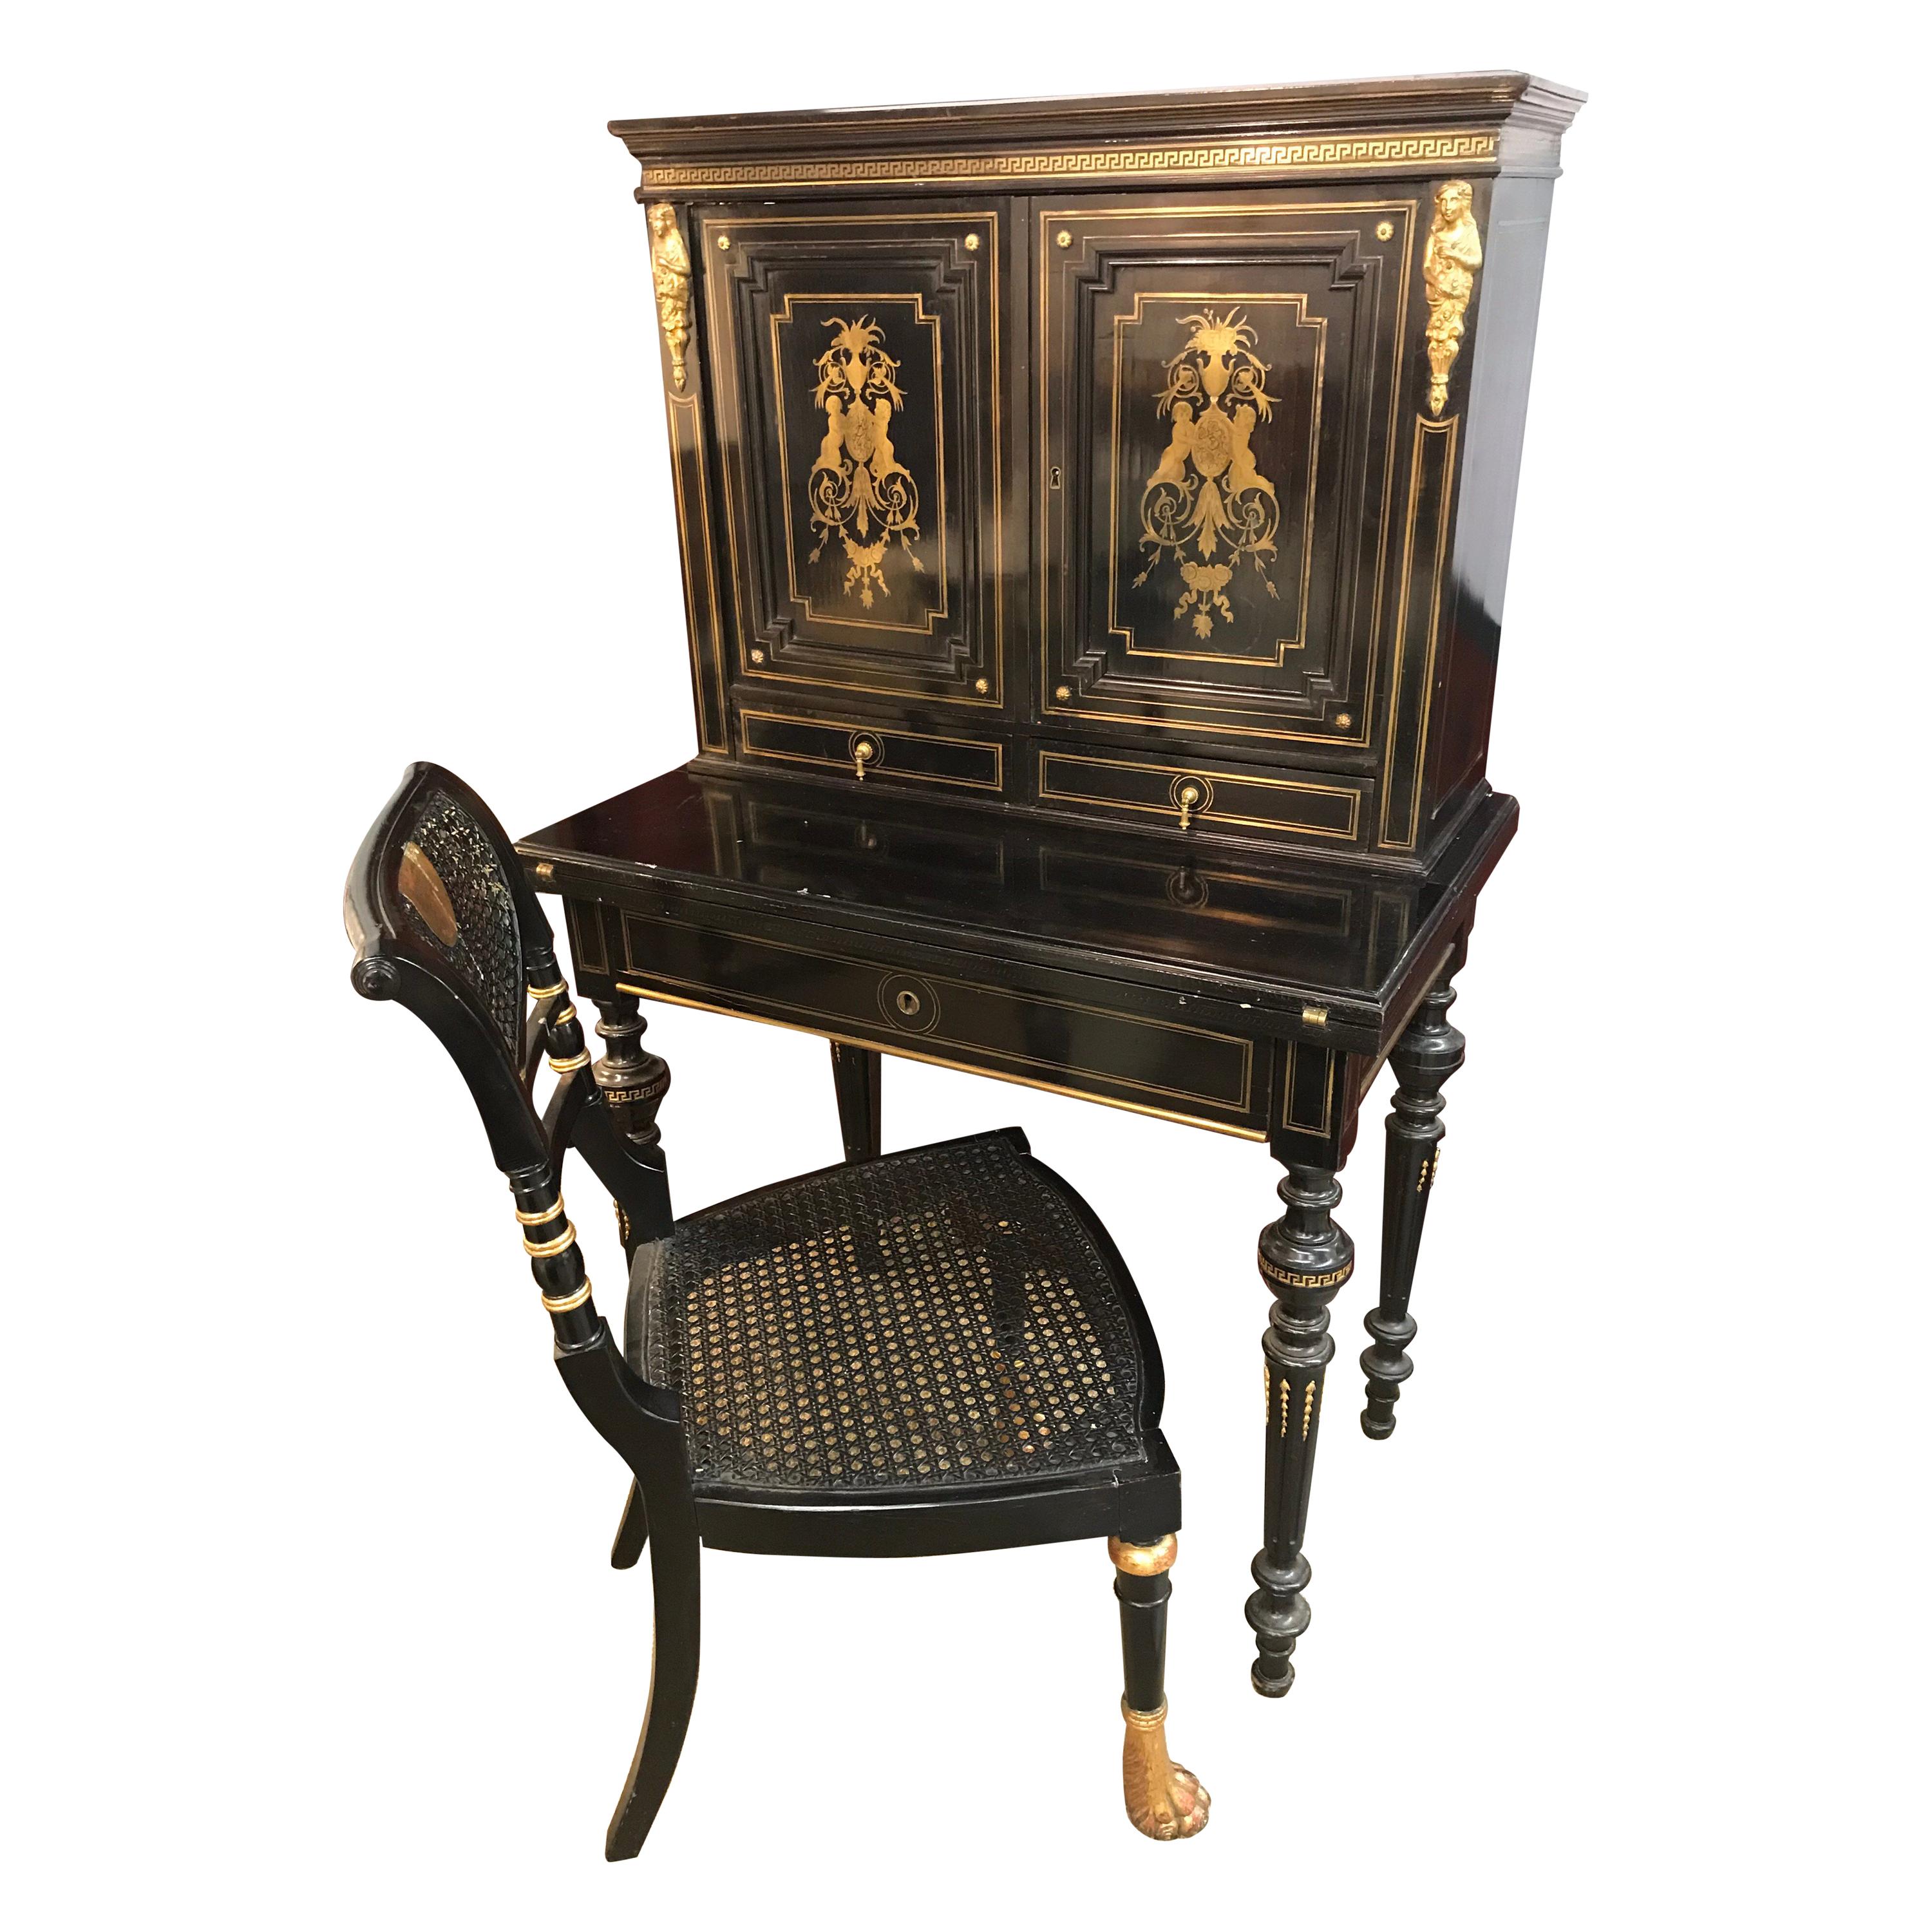 Black and Gold Chinoiserie Directoire Secretary Desk and Chair